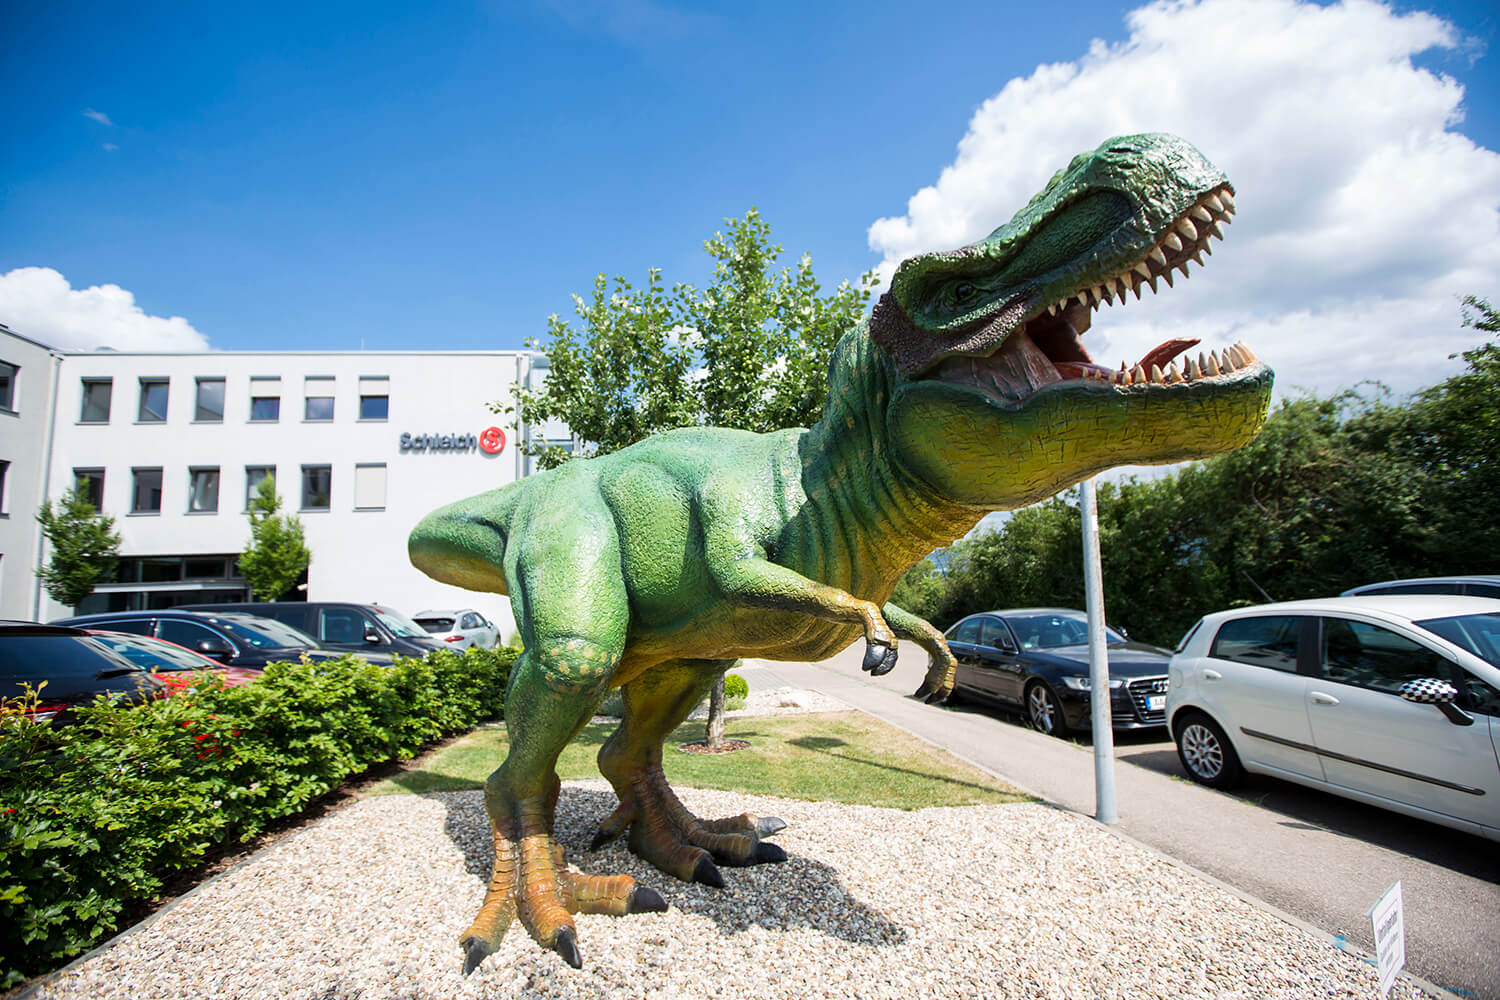 Schleich headquarters with a green life-sized T-Rex in front of the building.